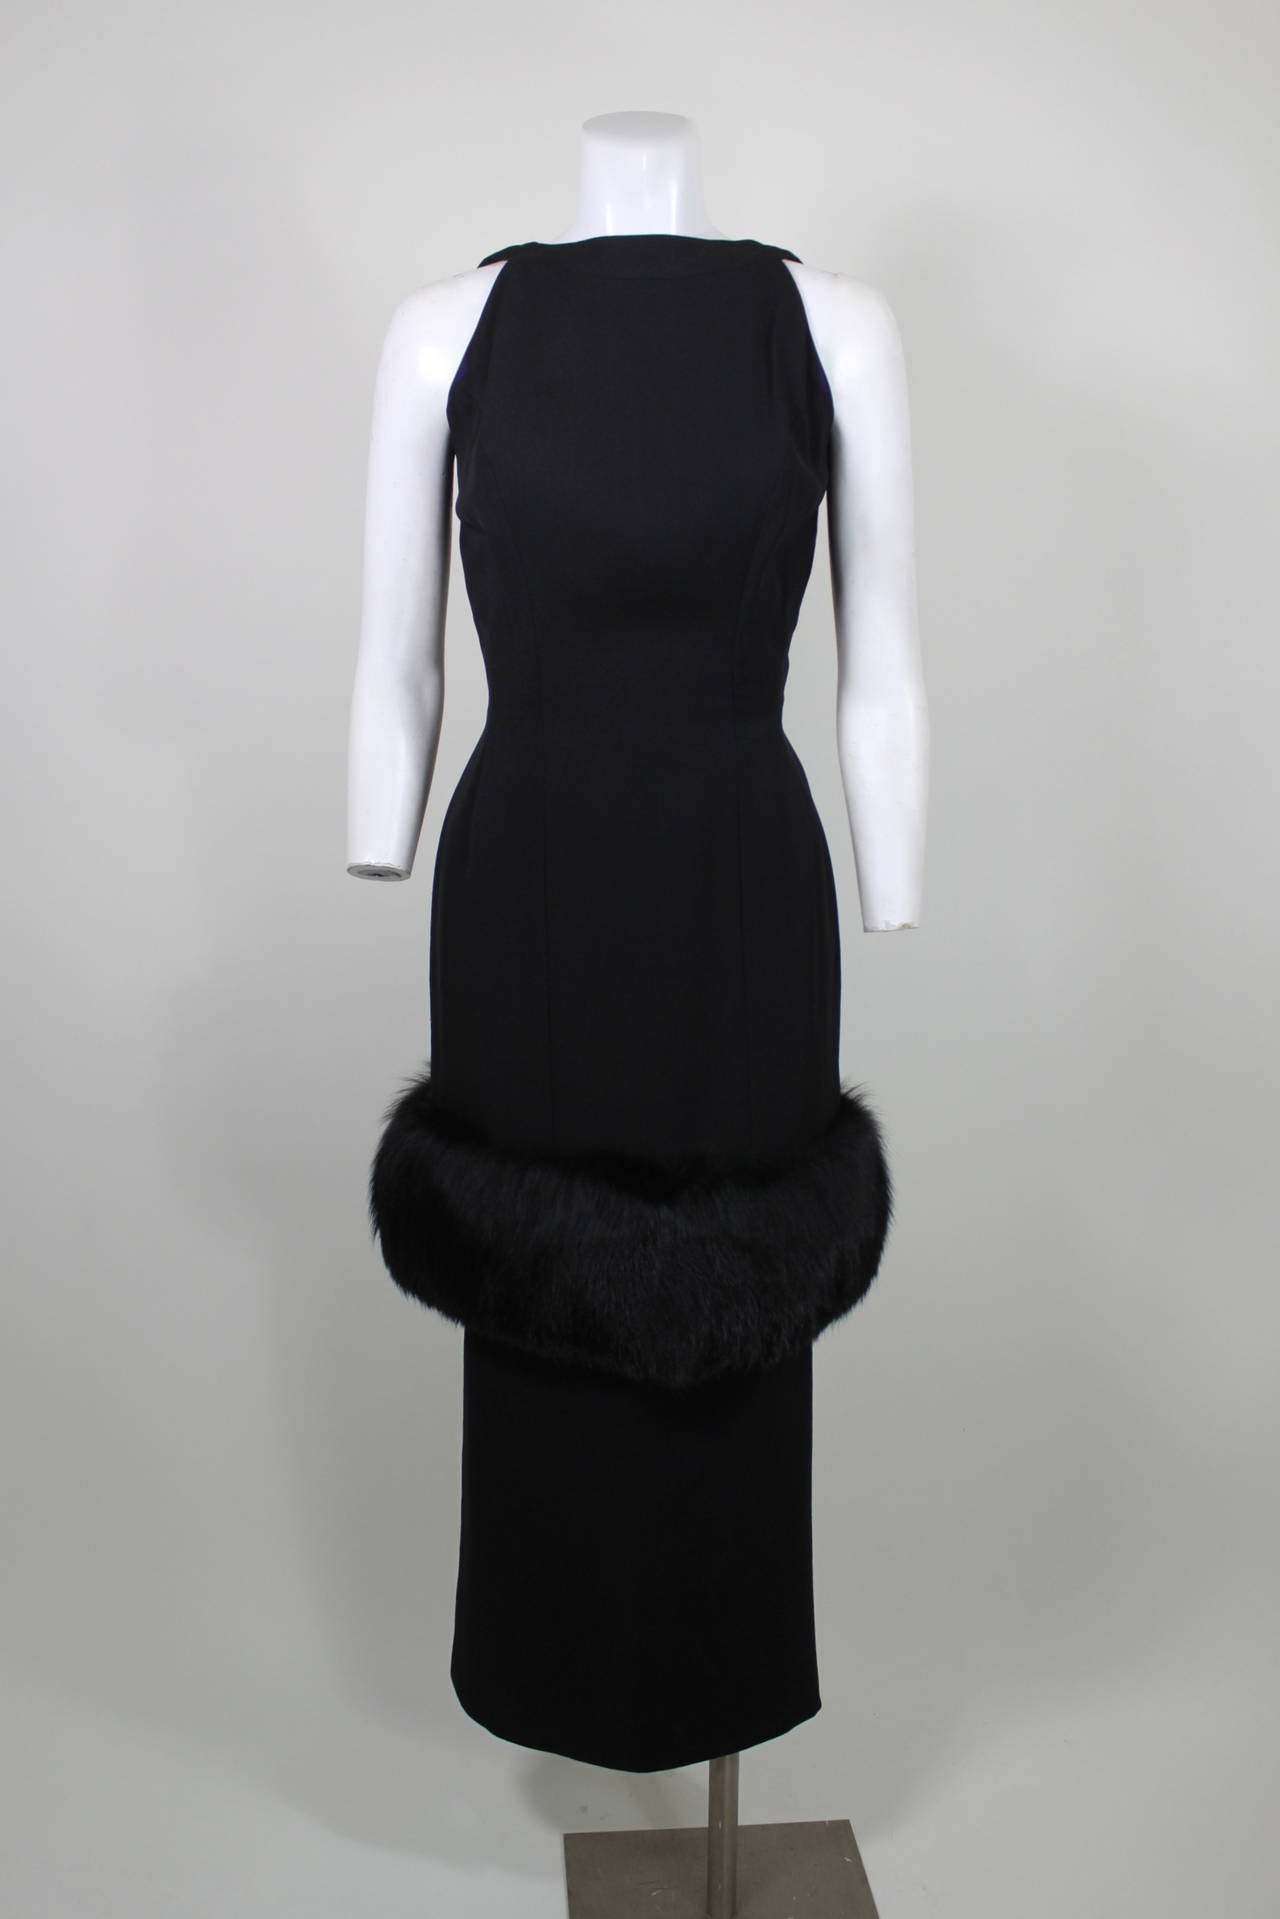 A gorgeous two-piece evening ensemble from the 1960s. Done in gorgeously tailored wool, the sleeveless bodice features a lux fur trim that hits just below the hip. A high-waist midi pencil skirt accompanies the ensemble for a longer silhouette.